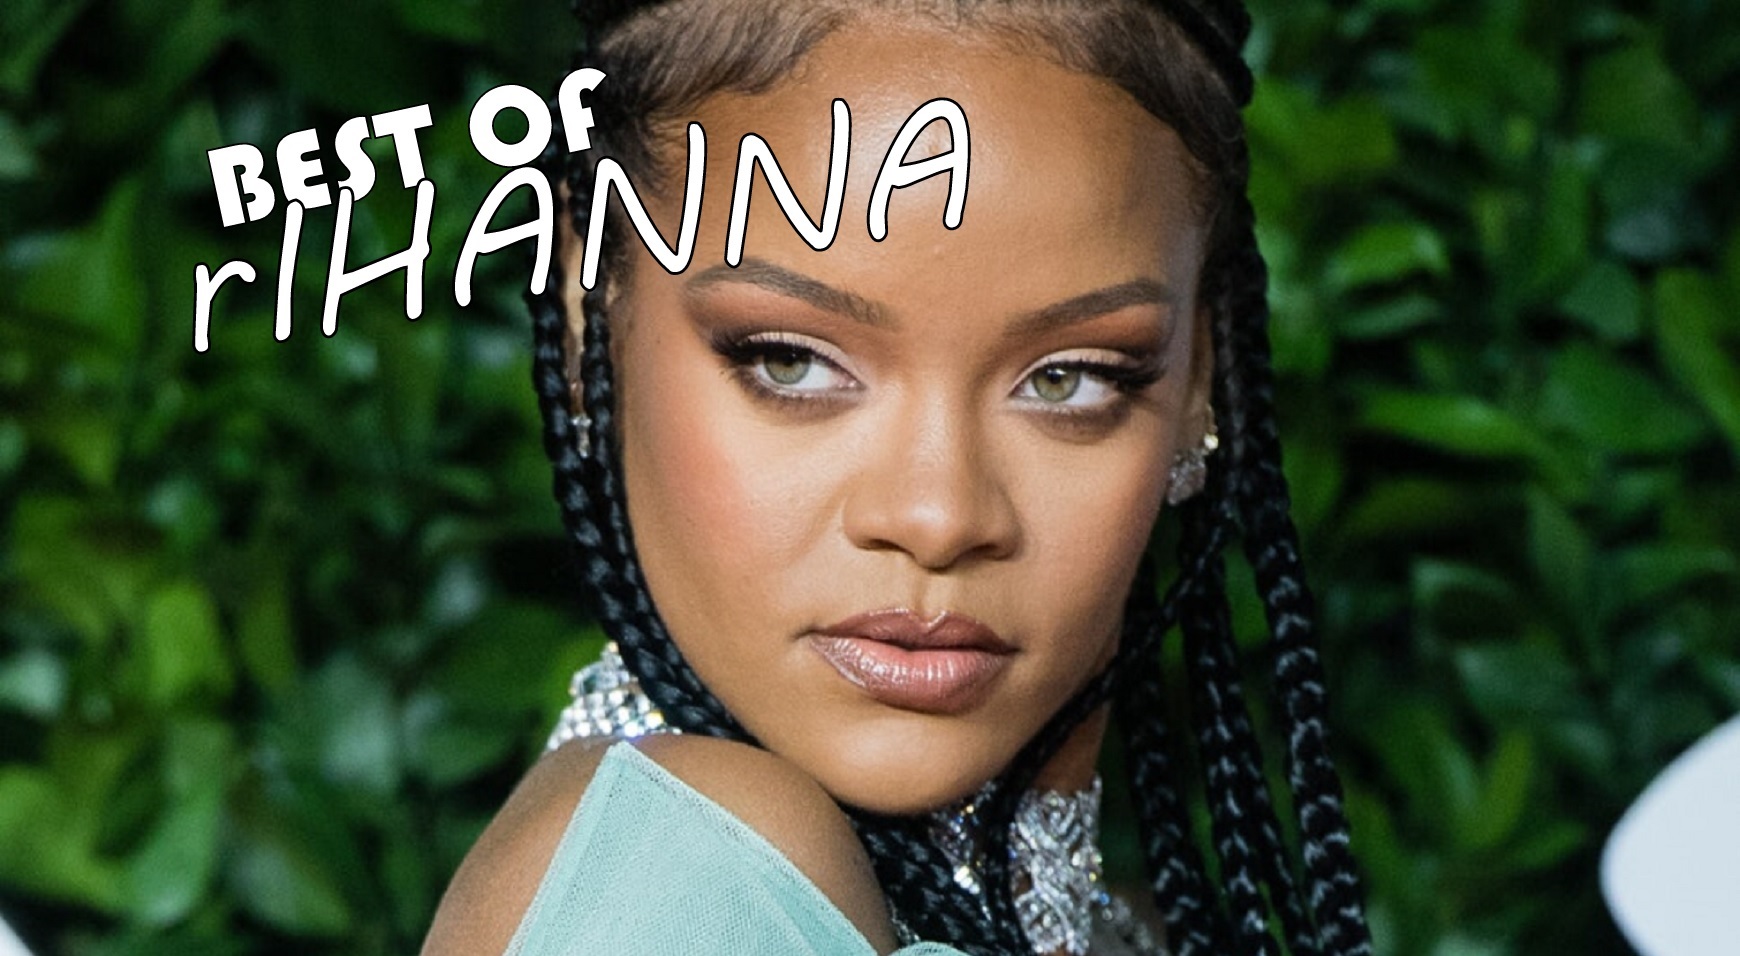 Ranking Top 10 Best Songs Of Rihanna That You Ought Know If you're a Fan